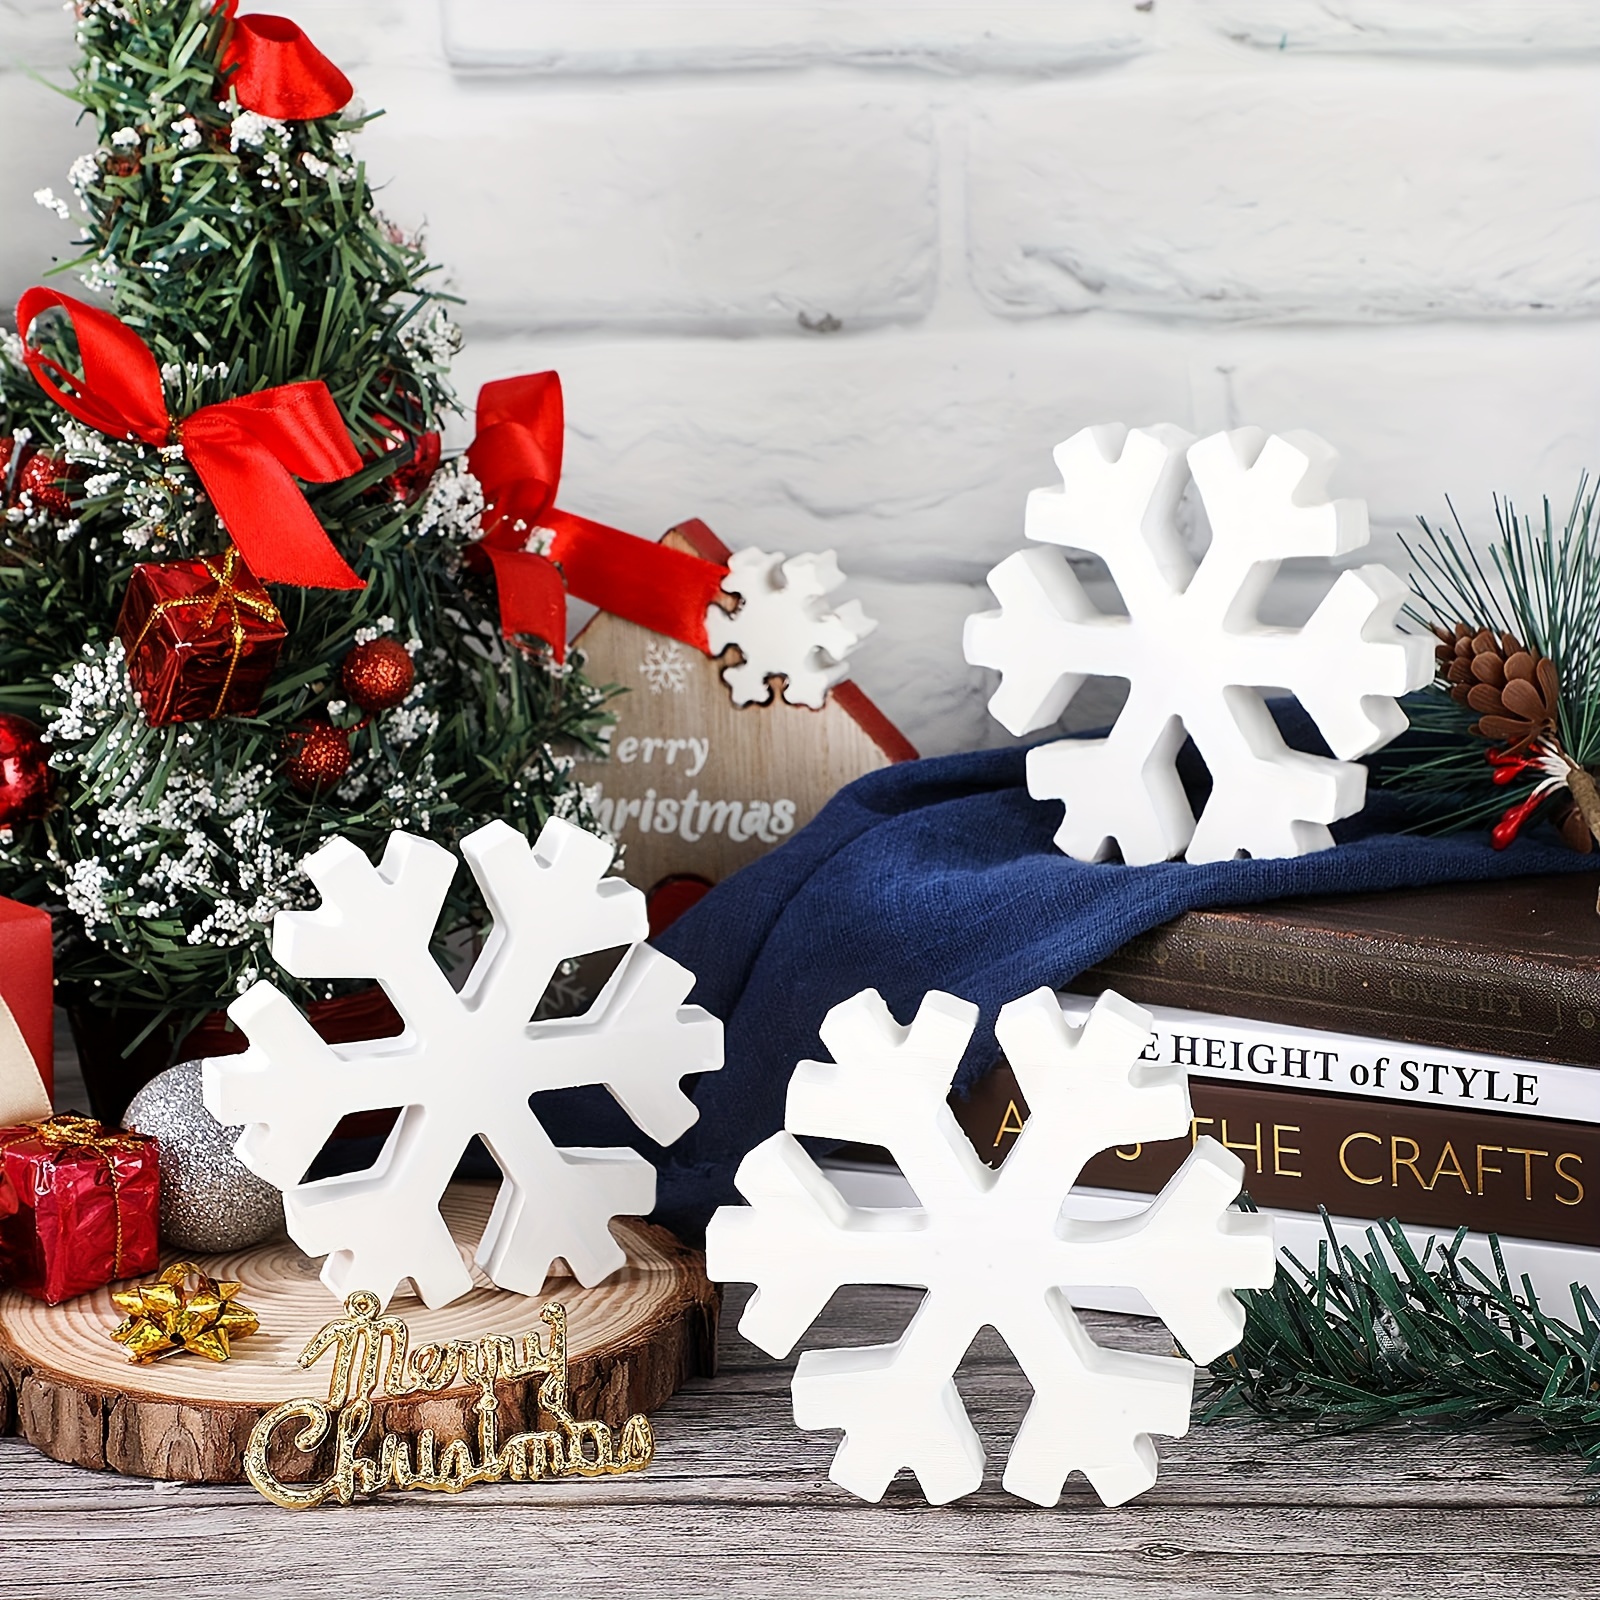 Winter Snowflake Decorations, White Standing Wooden Snowflakes